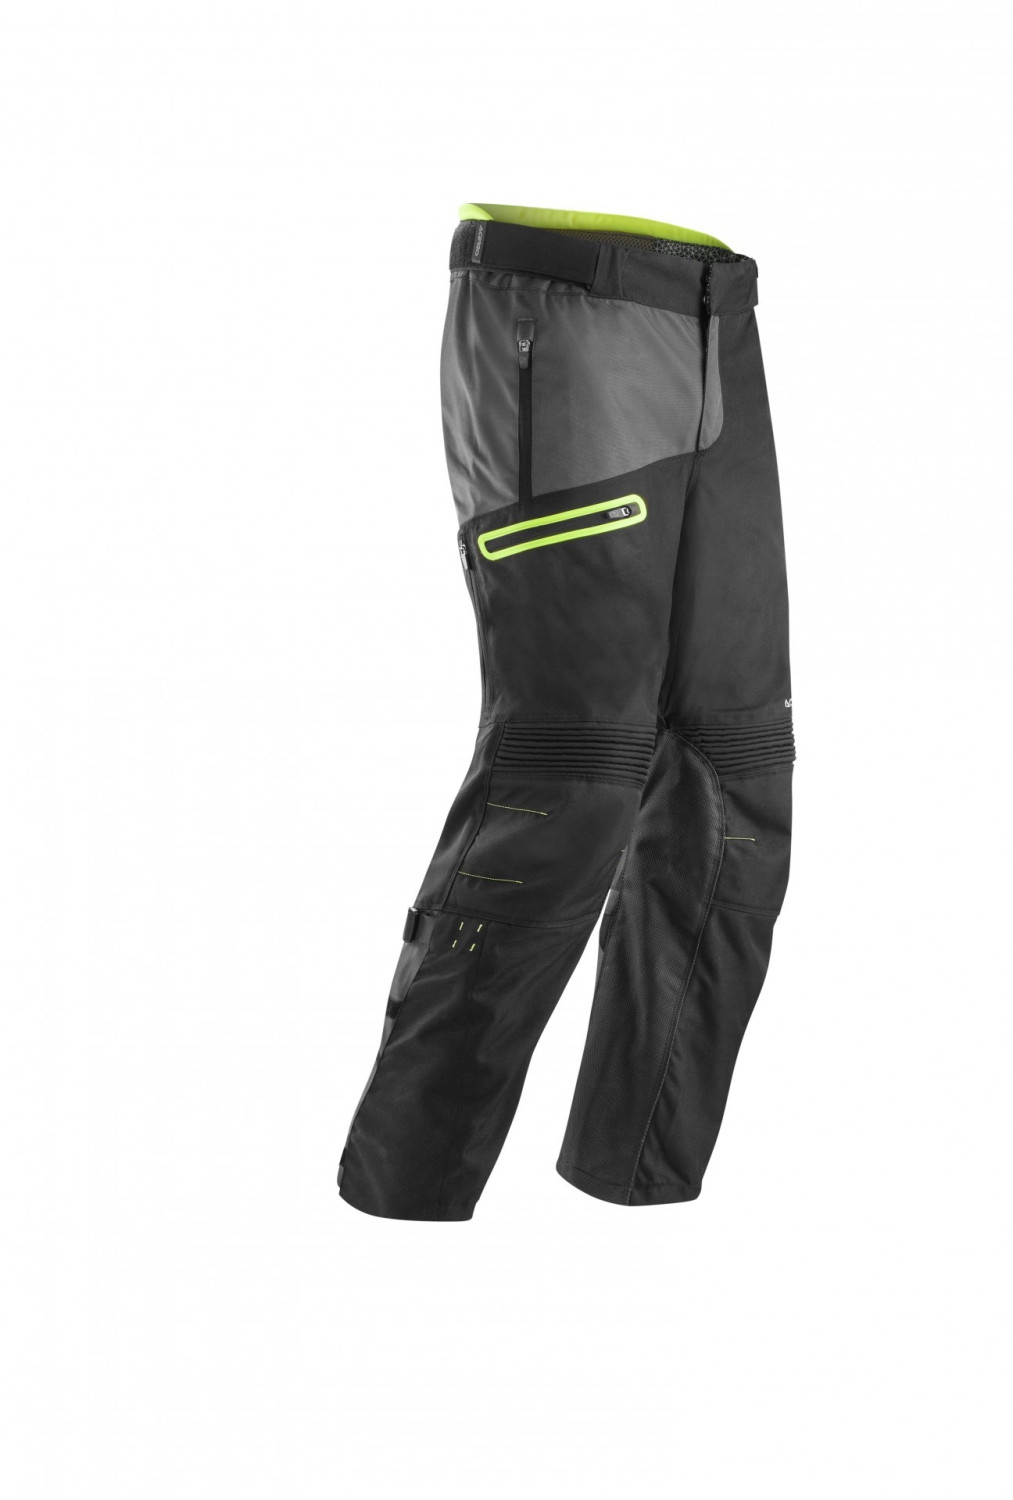 Photos - Motorcycle Clothing ACERBIS Enduro-One Baggy black/yellow fluo 